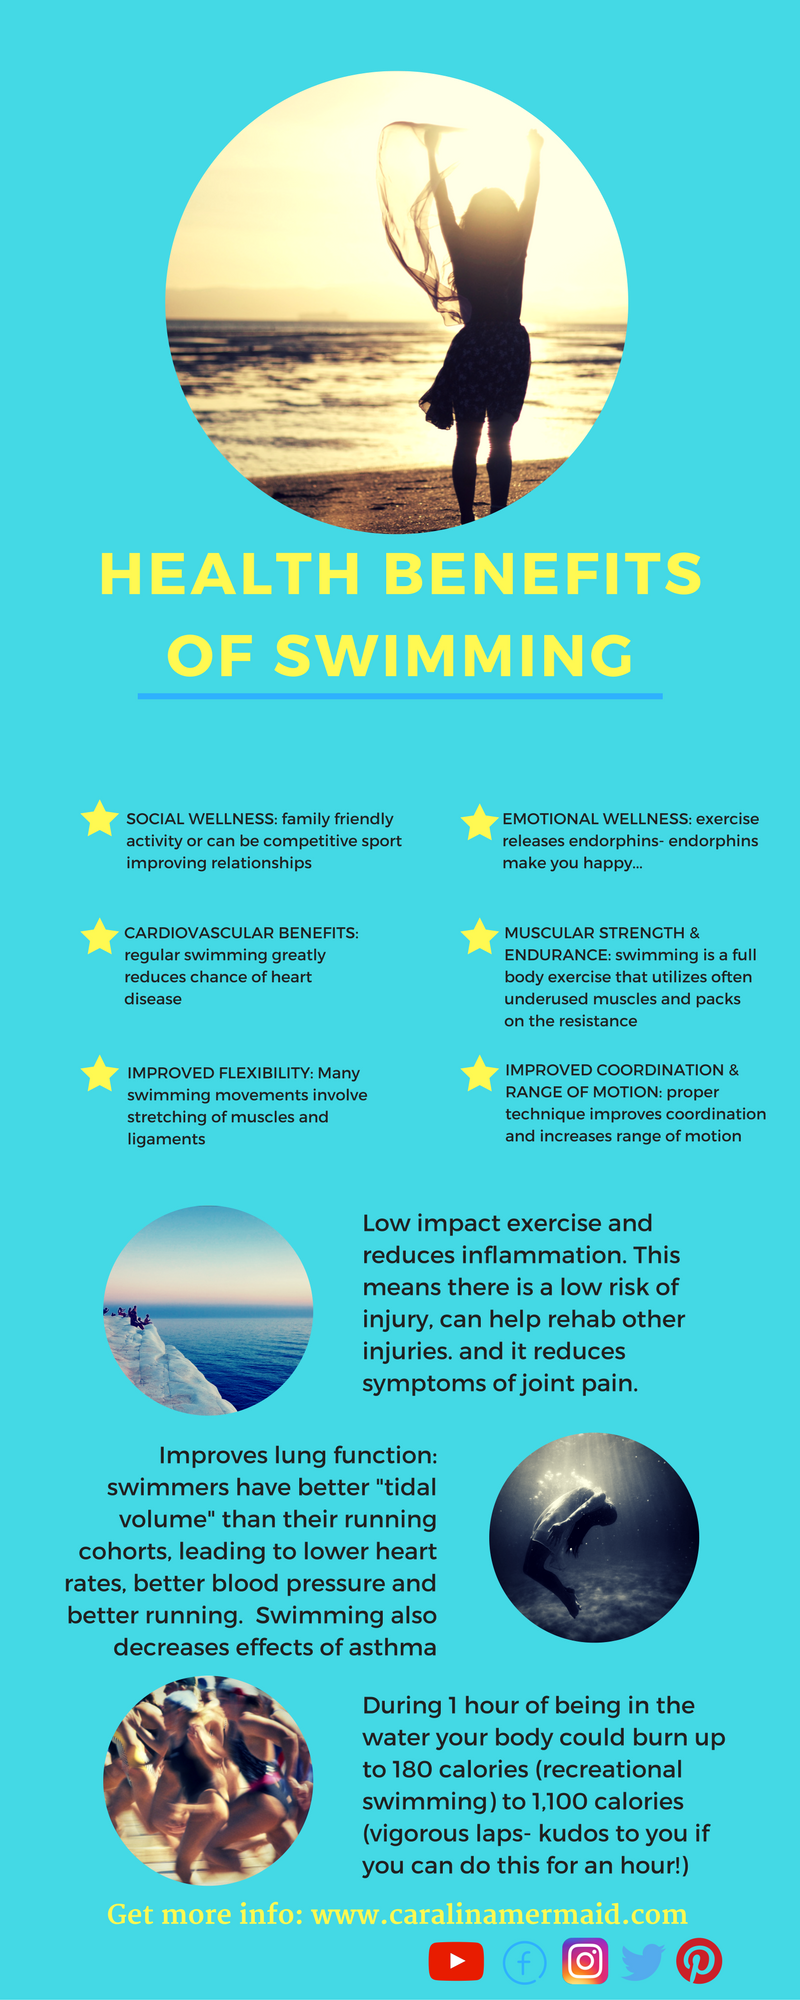 Health Benefits of Swimming #infographic #Swimming #infographics #Health #Infographic #Benefits of Swimming